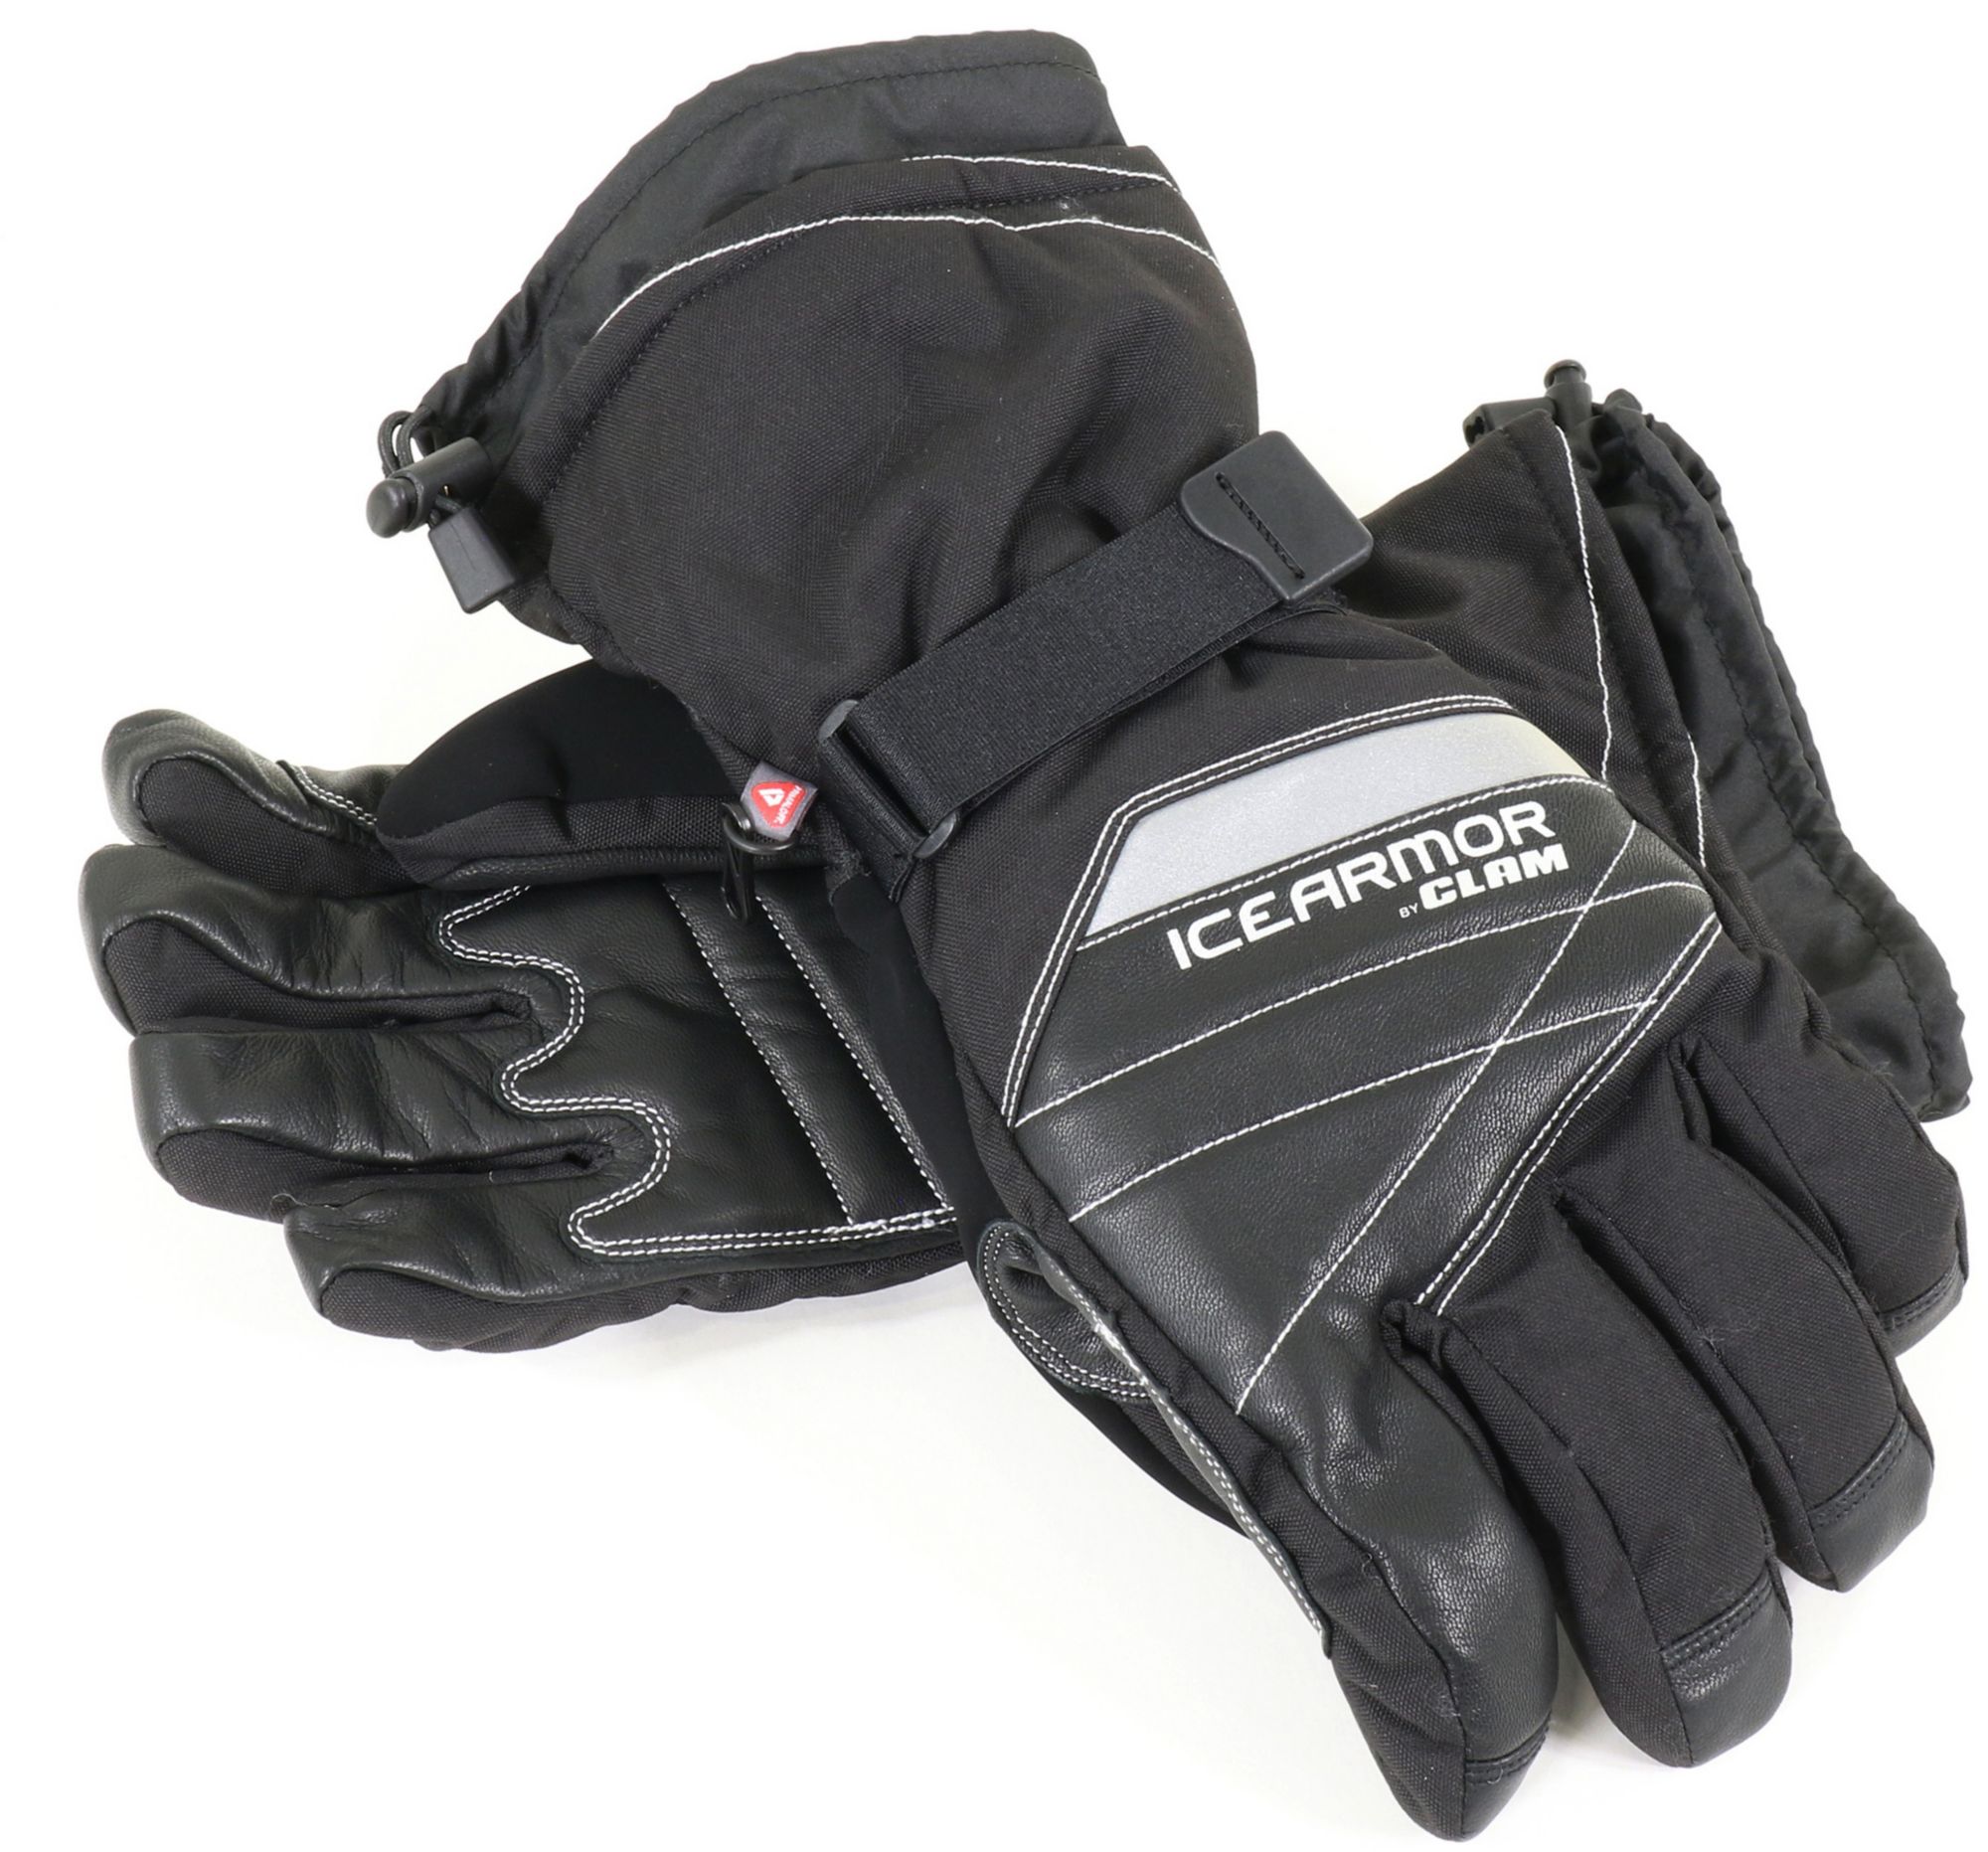 Photos - Other for Fishing Clam Outdoors Renegade Glove, Men's, Small, Black 23CLOMRNGDGLVBLCKFIC